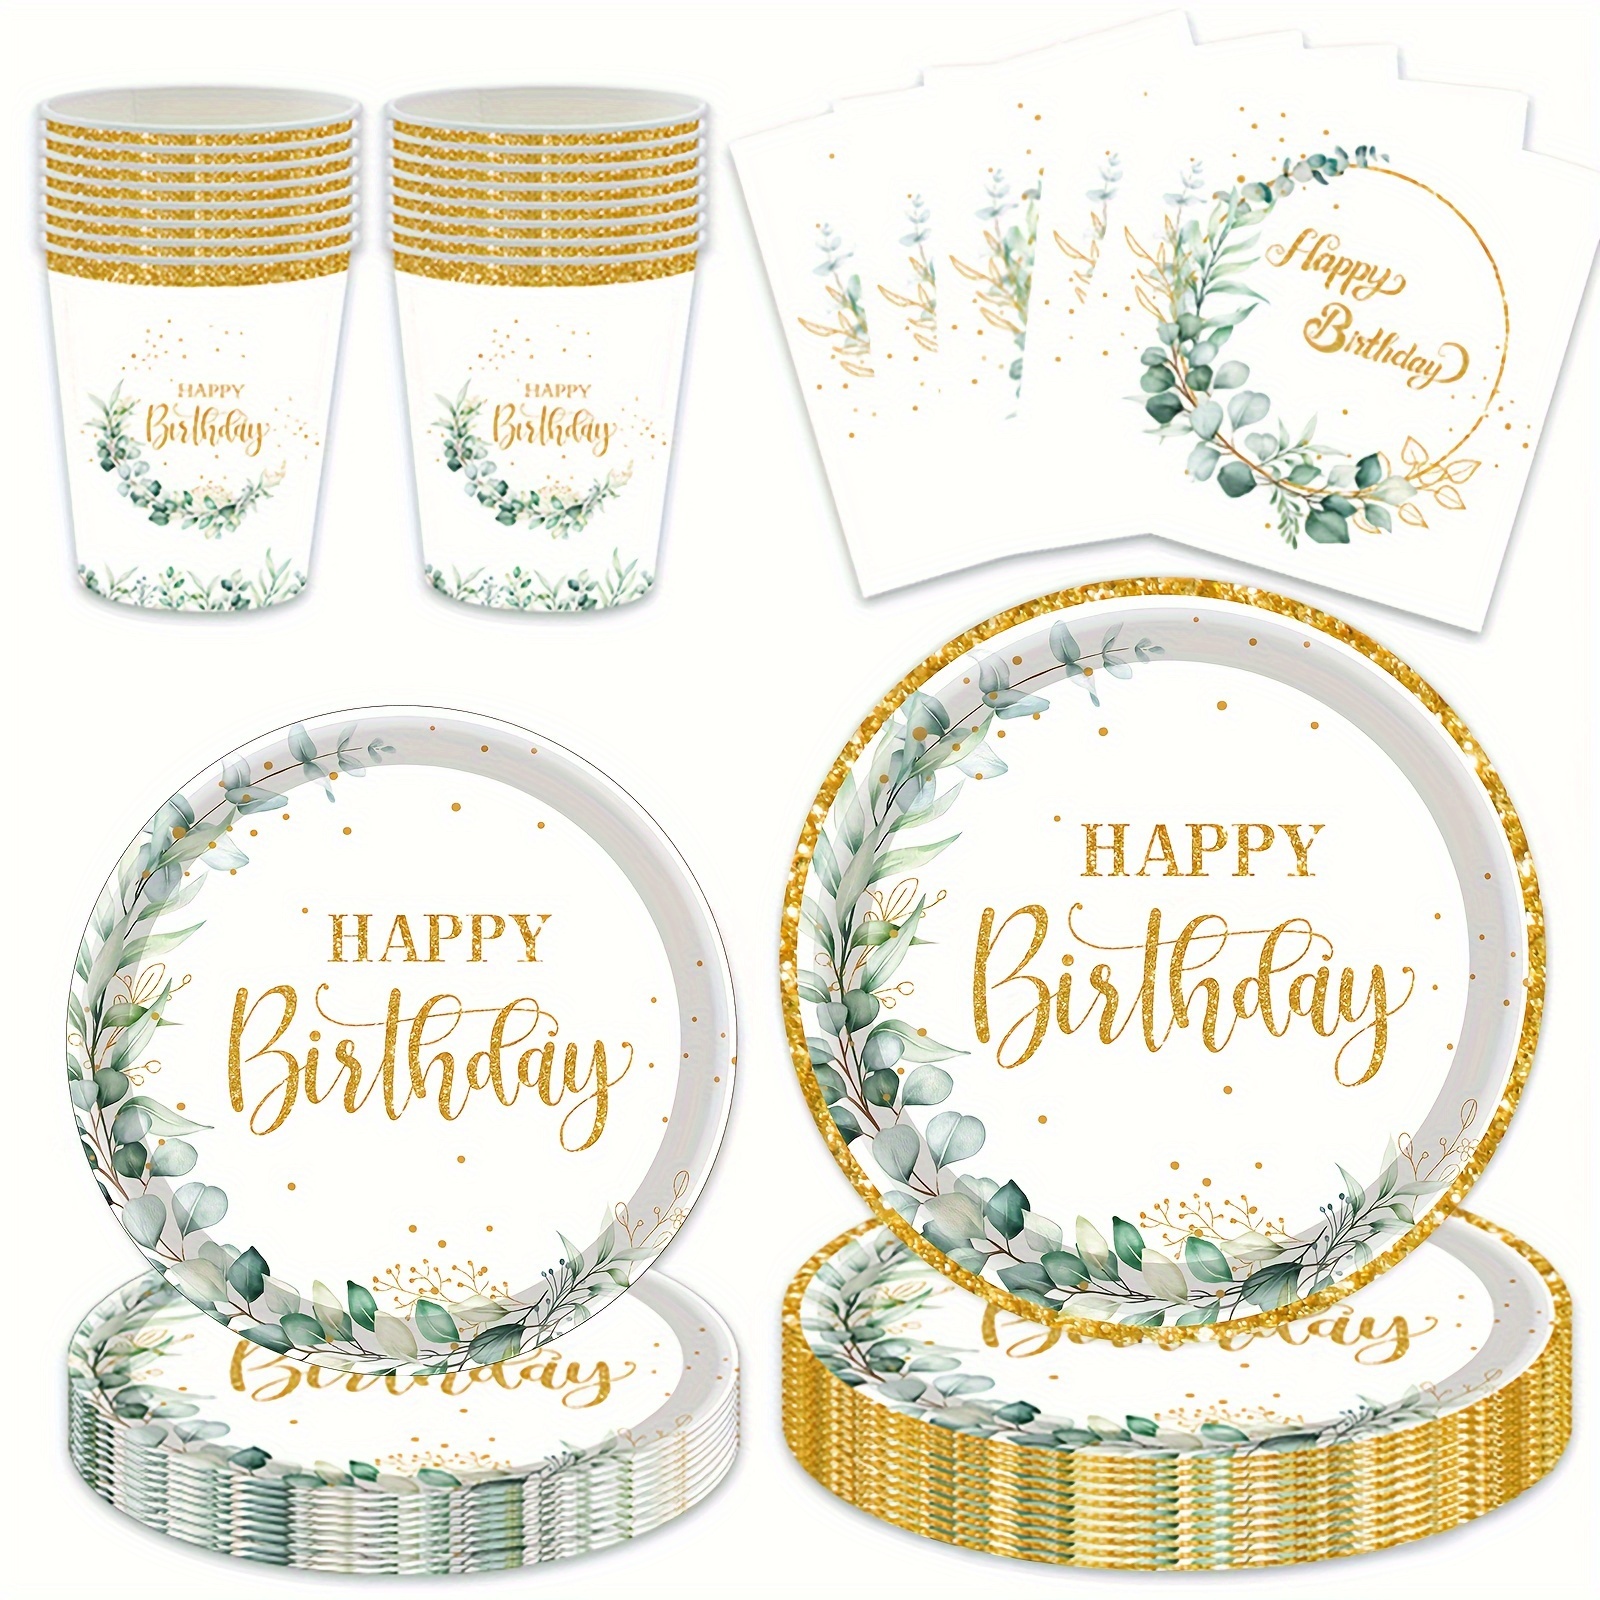 

Sage Green And Gold Foil Happy Birthday Party Supplies Set - Disposable Paper Plates, Cups, Napkins For Jungle Themed Birthday, Wedding, Bridal Shower - Elegant Party Tableware Kit For All Seasons